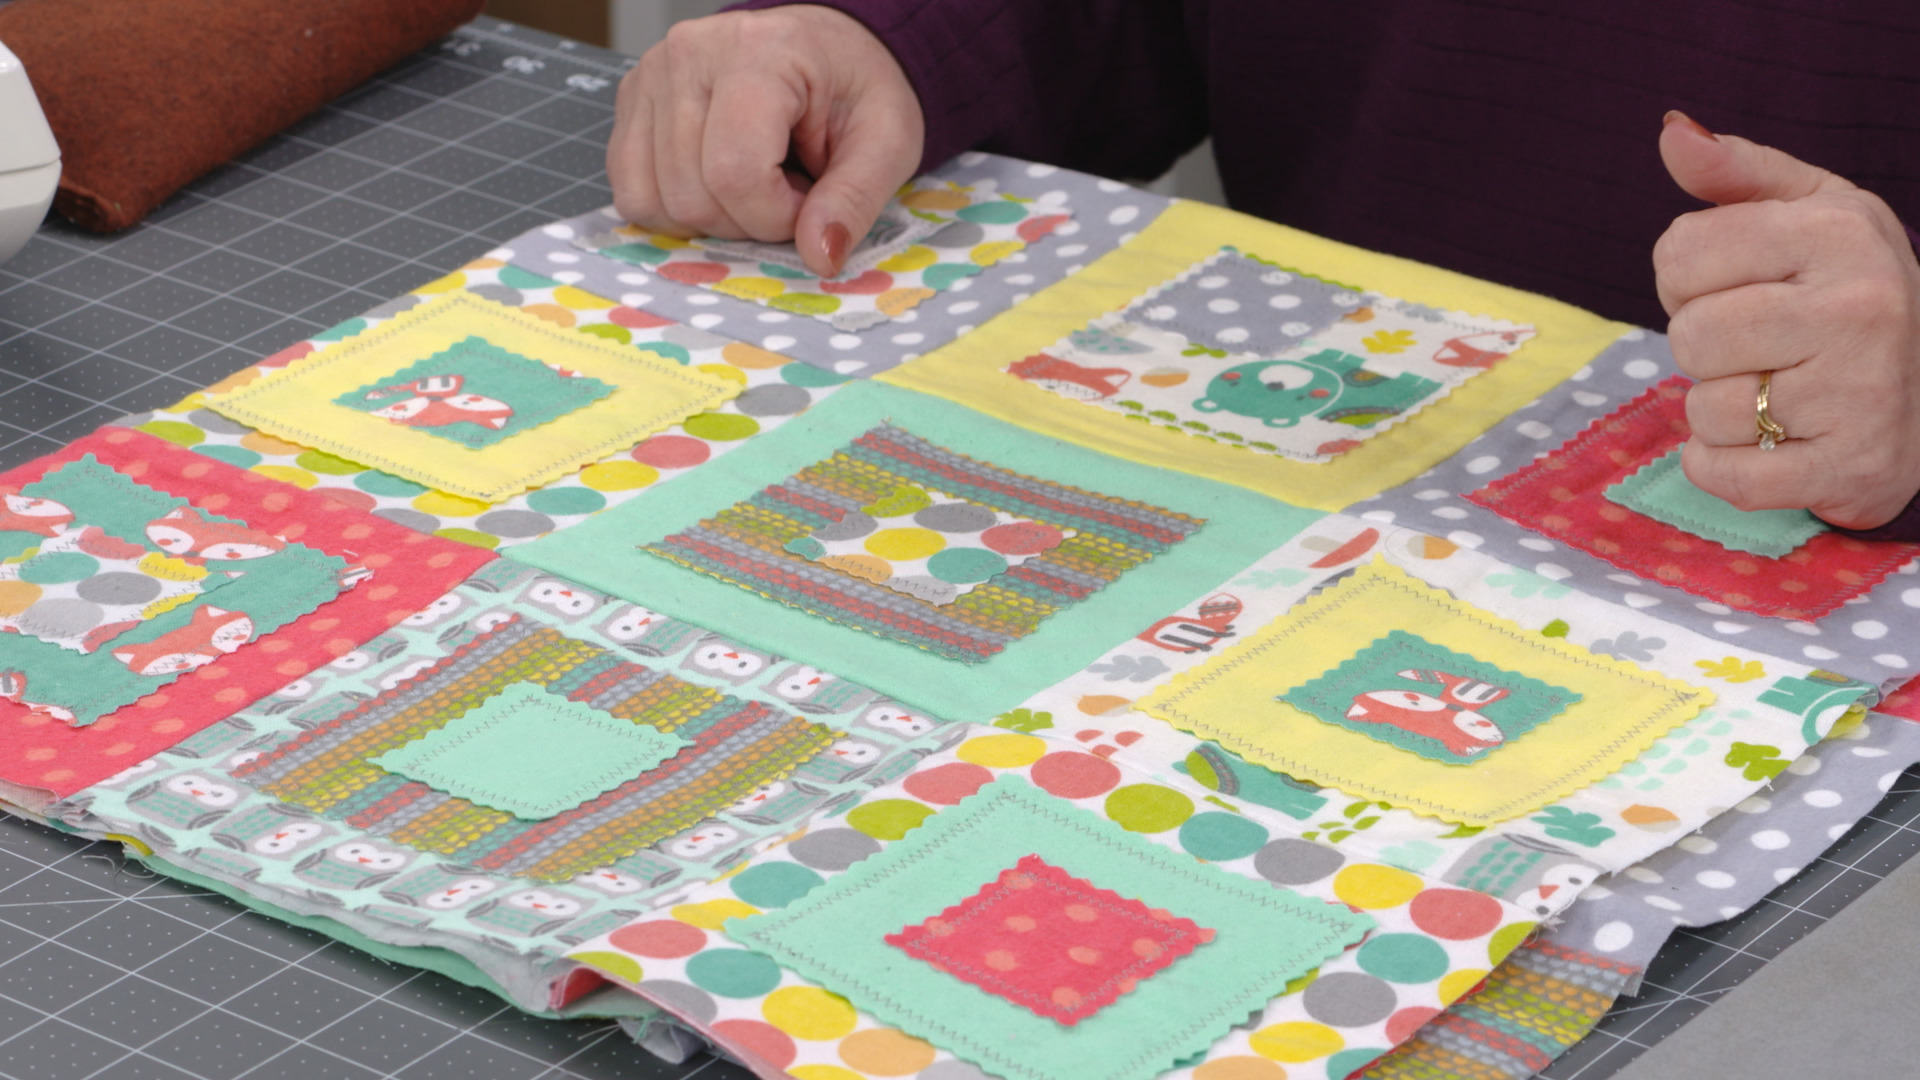 How to make a Raw Edges Square Quilt 